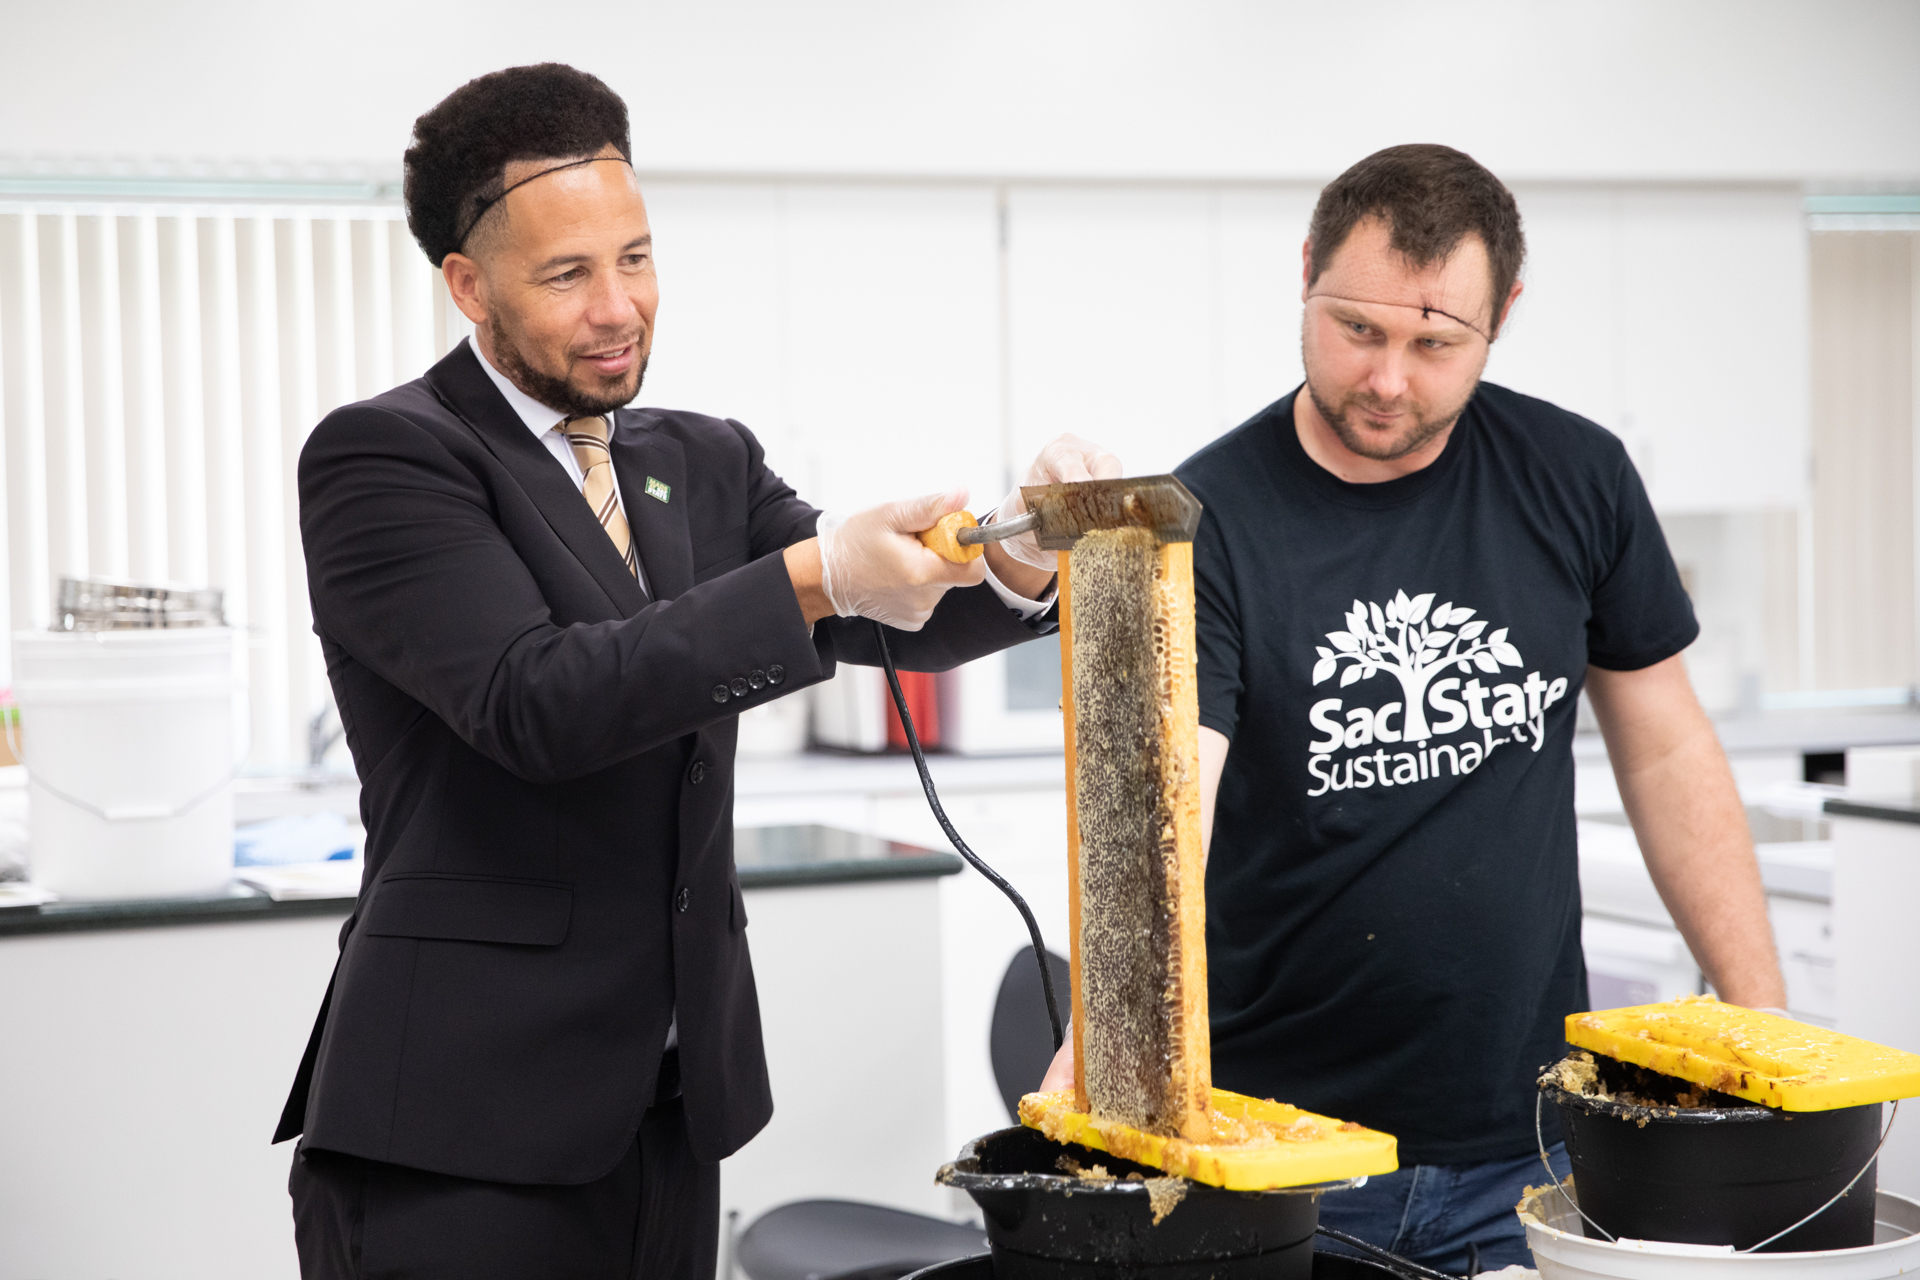 President Luke Wood and a man in a Sac State Sustainability T-shirt scrape honey off of a comb.